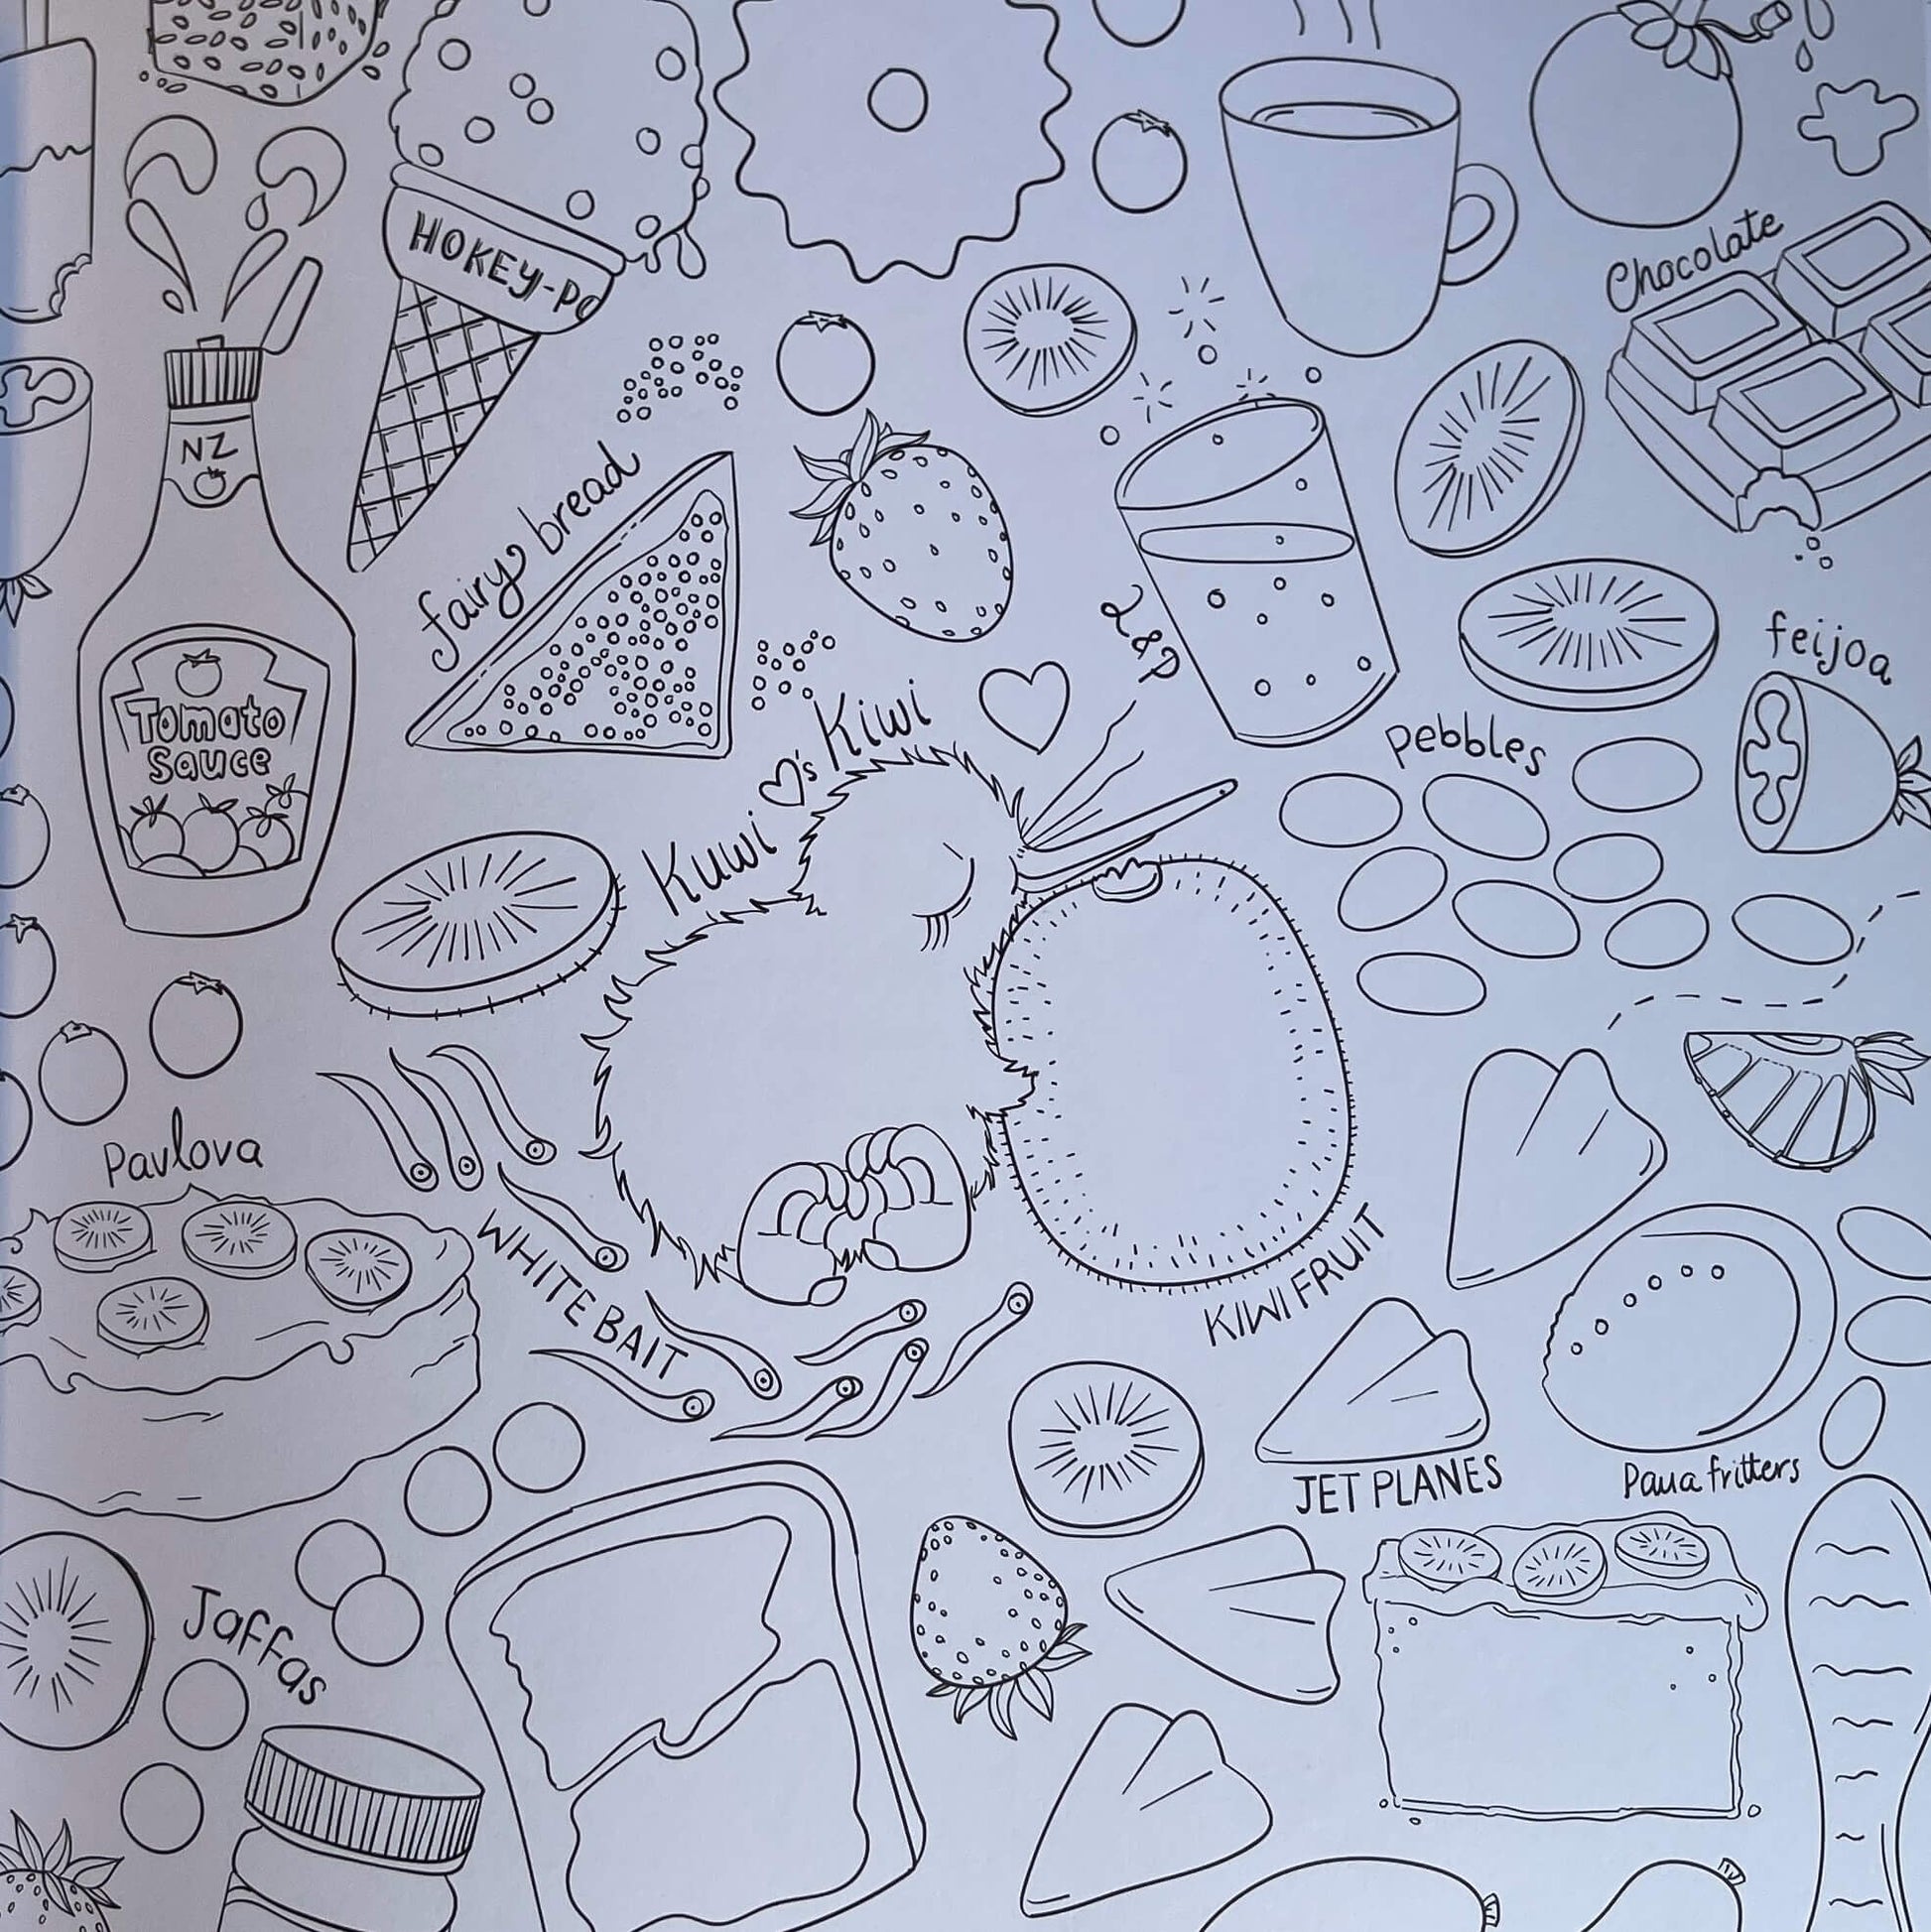 Page from Kuwis Creative colouring book by Kat Merewether.